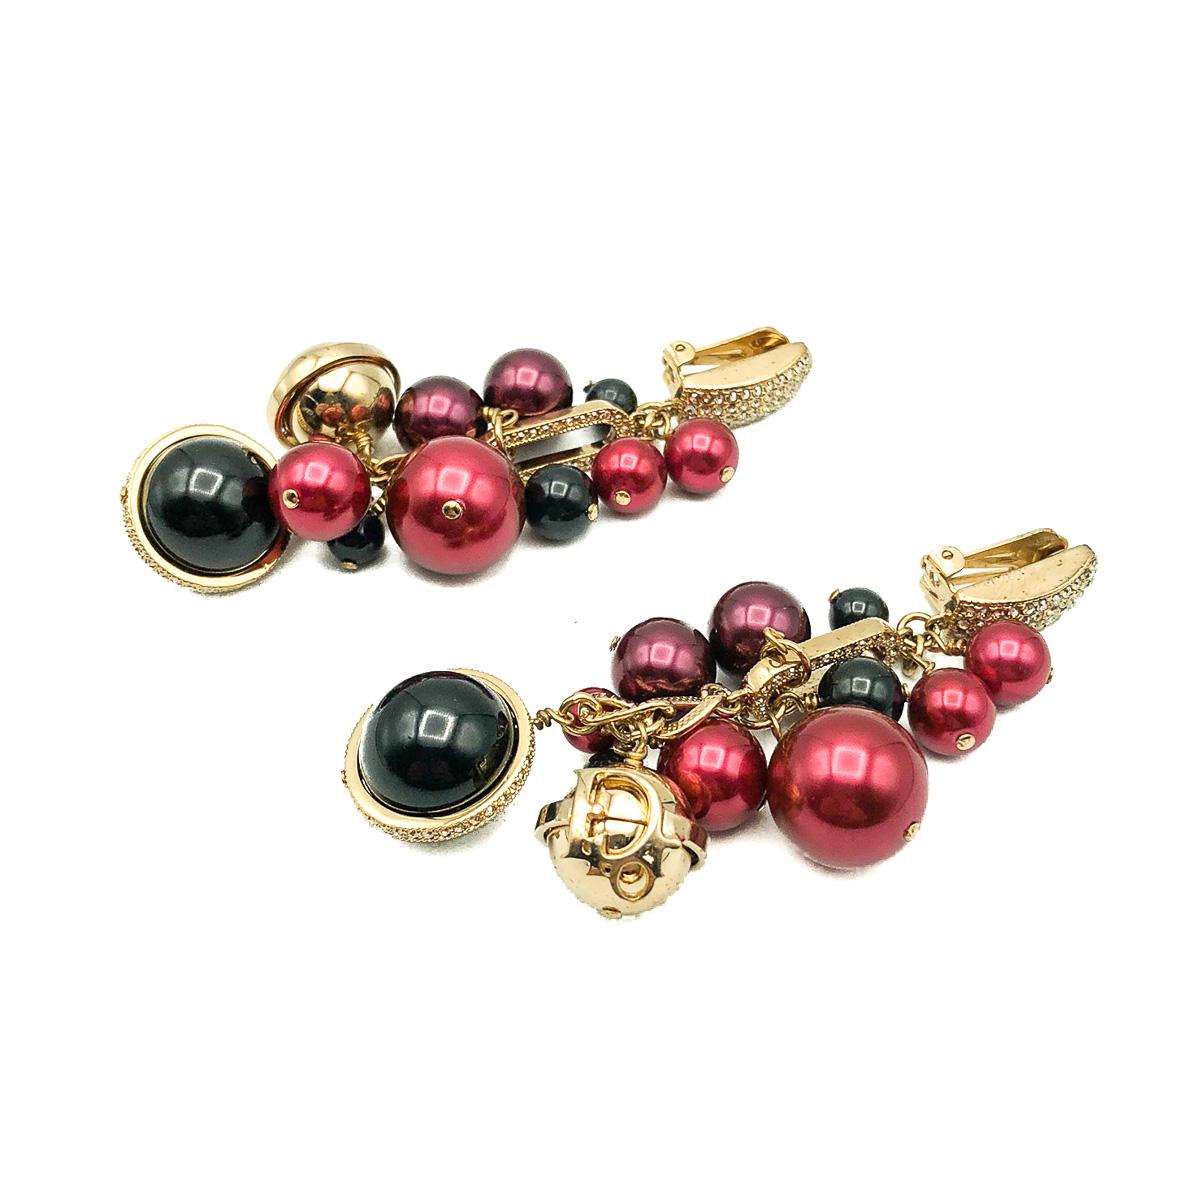 A pair of Vintage 2000s Dior Sphere Earrings. Featuring a sublime array of deep pink, black and gold spheres suspended from crystal encrusted links. The gold spheres carrying the iconic name of Dior. Crafted from gold plated metal, crystal, glass